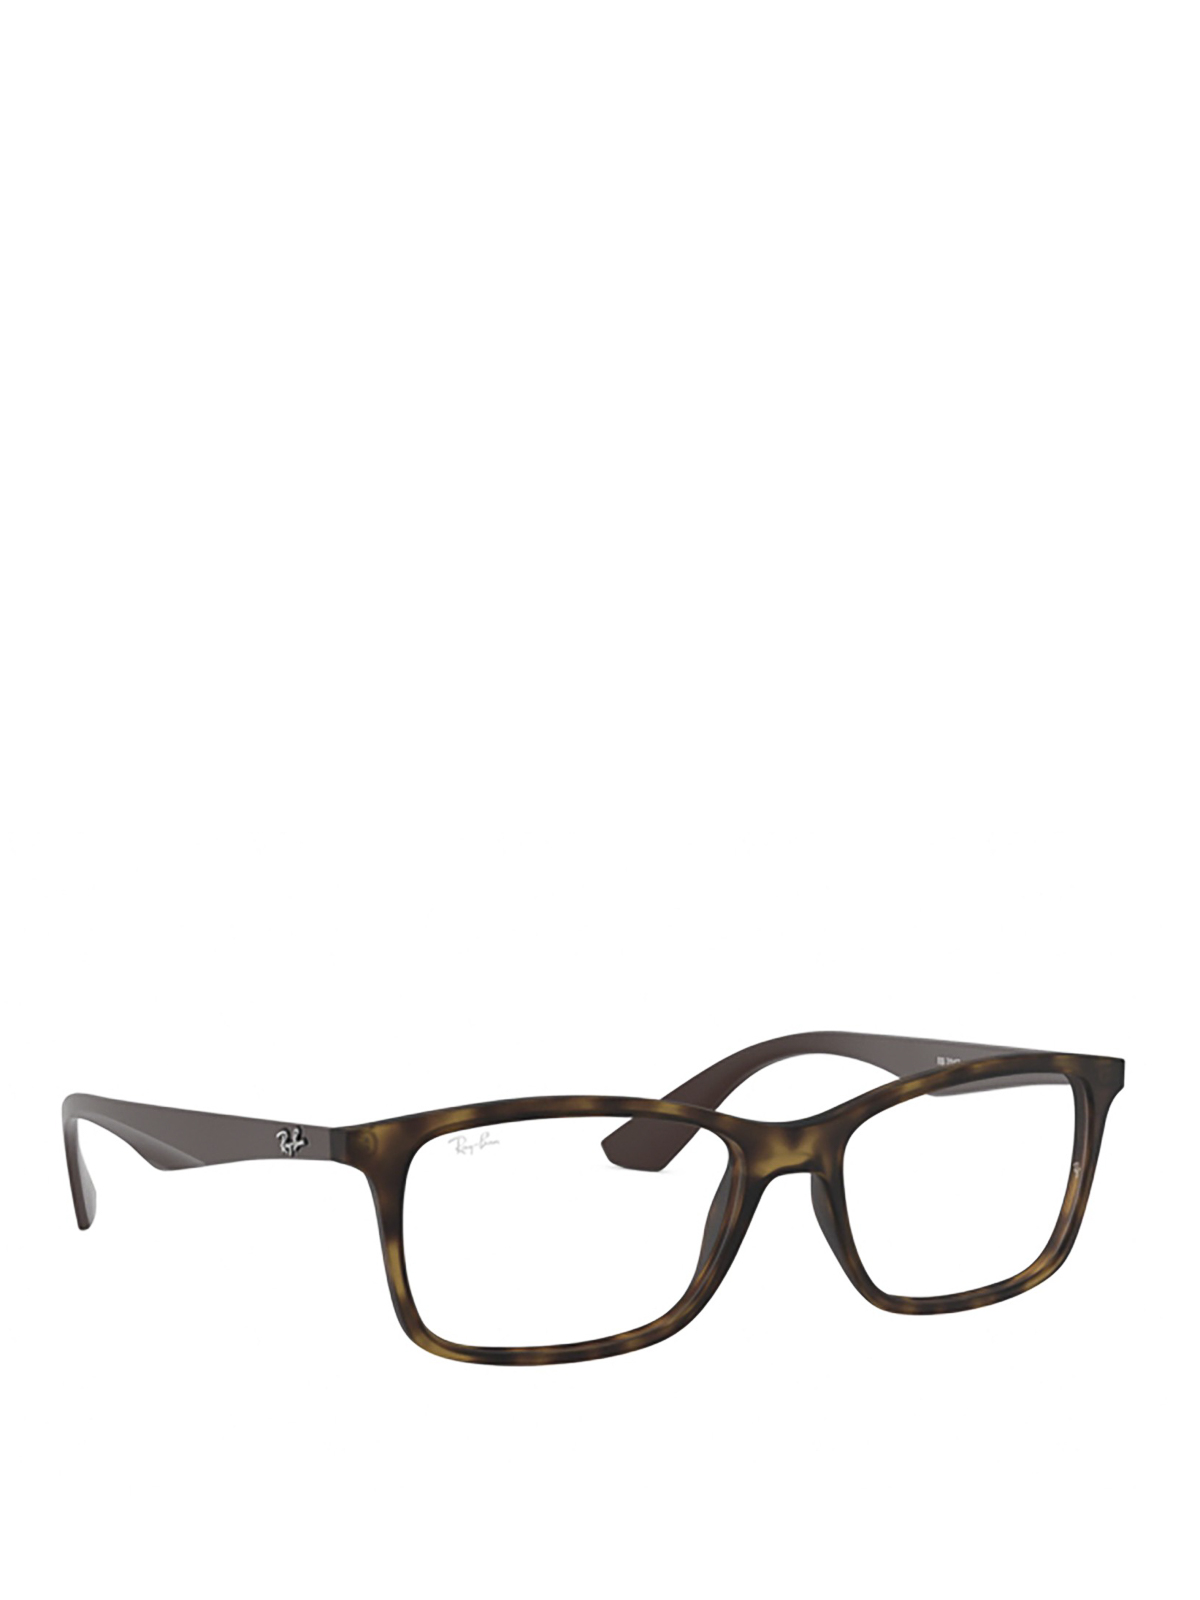 spectacle frames ray ban